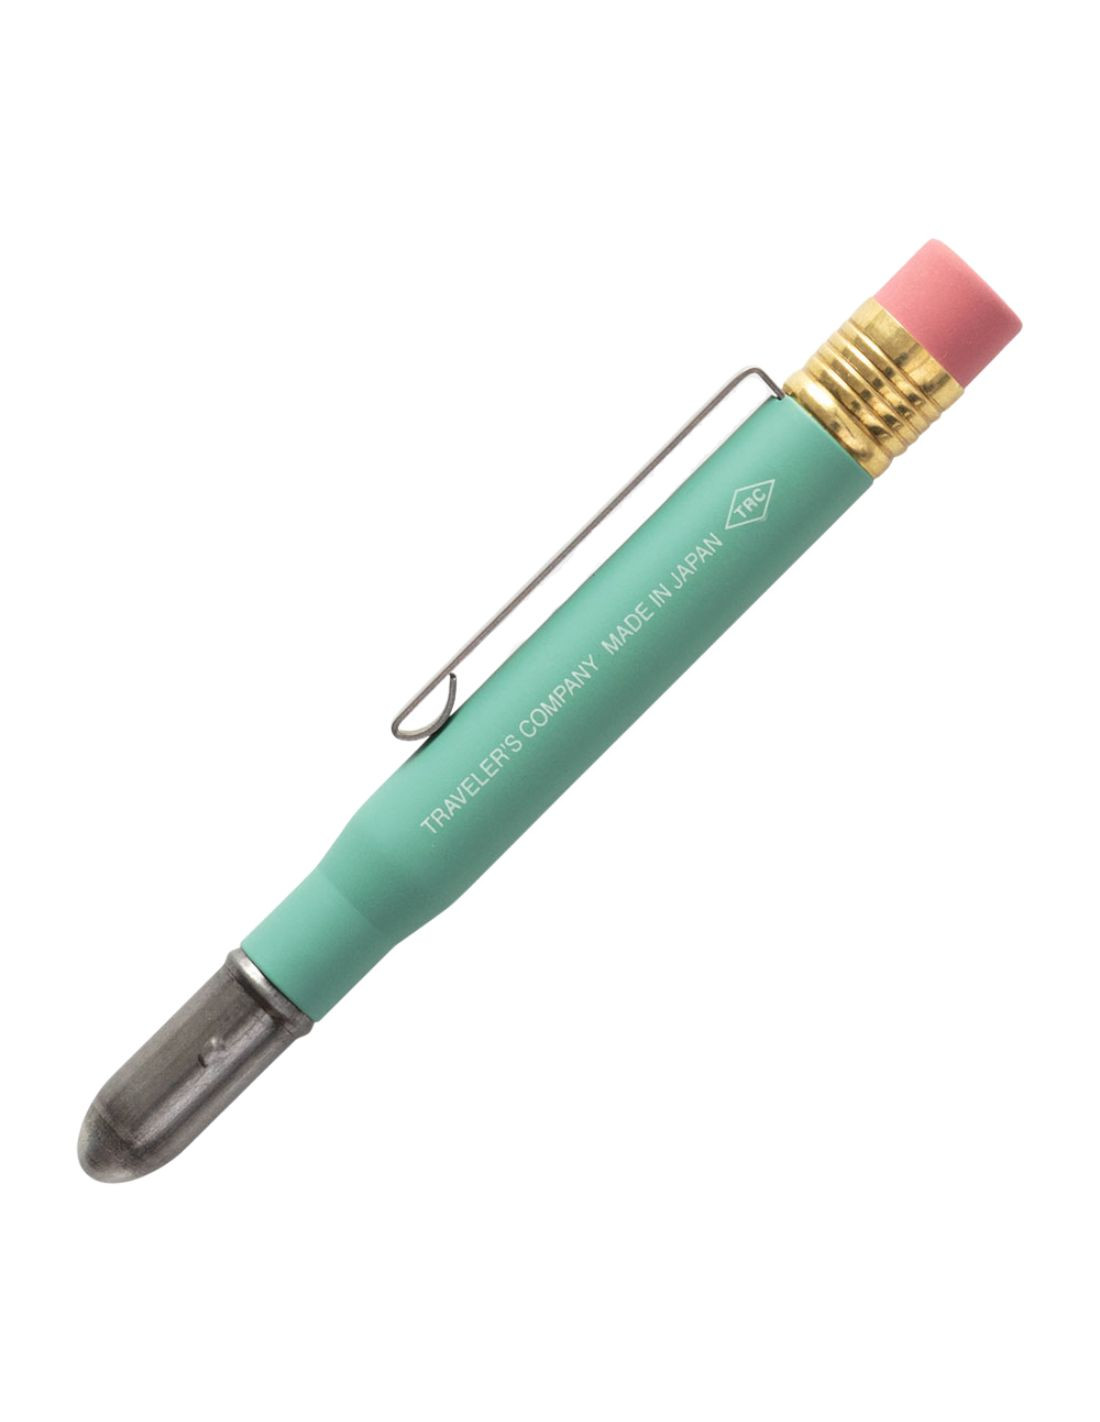 Brass Pencil - TRC BRASS Limited Color Factory Green - Traveler's Company